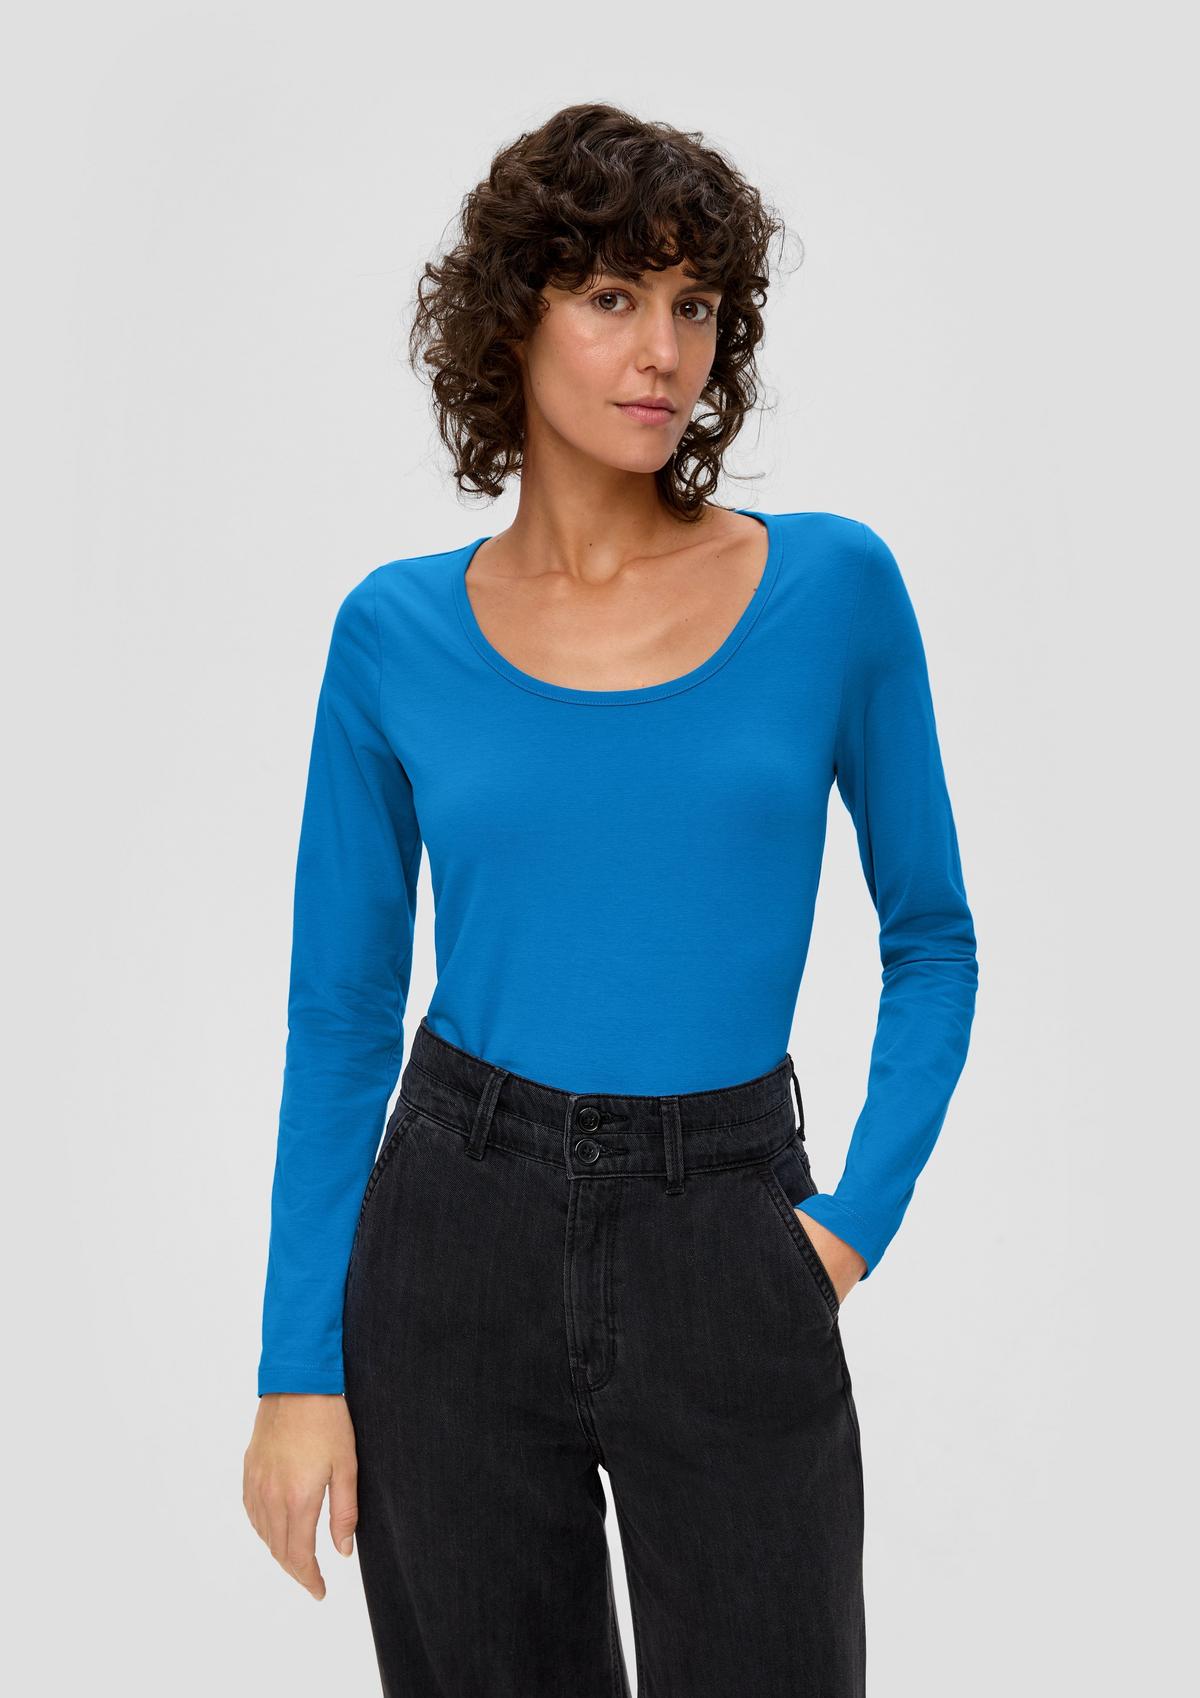 s.Oliver Cotton jersey long sleeve top